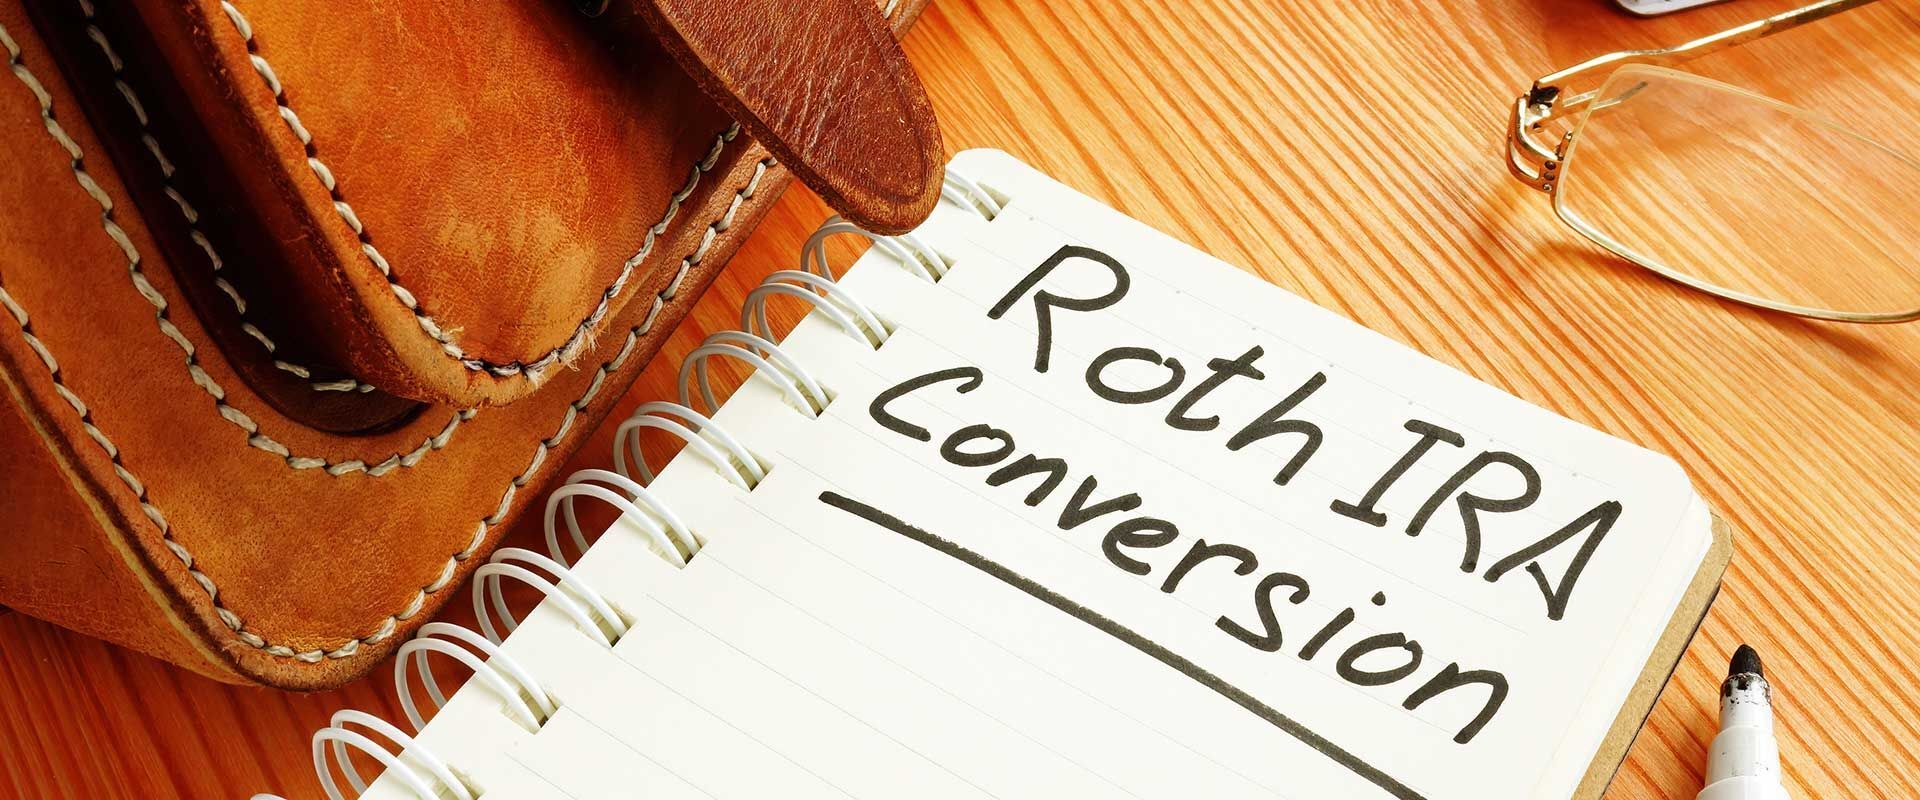 ROTH Conversions